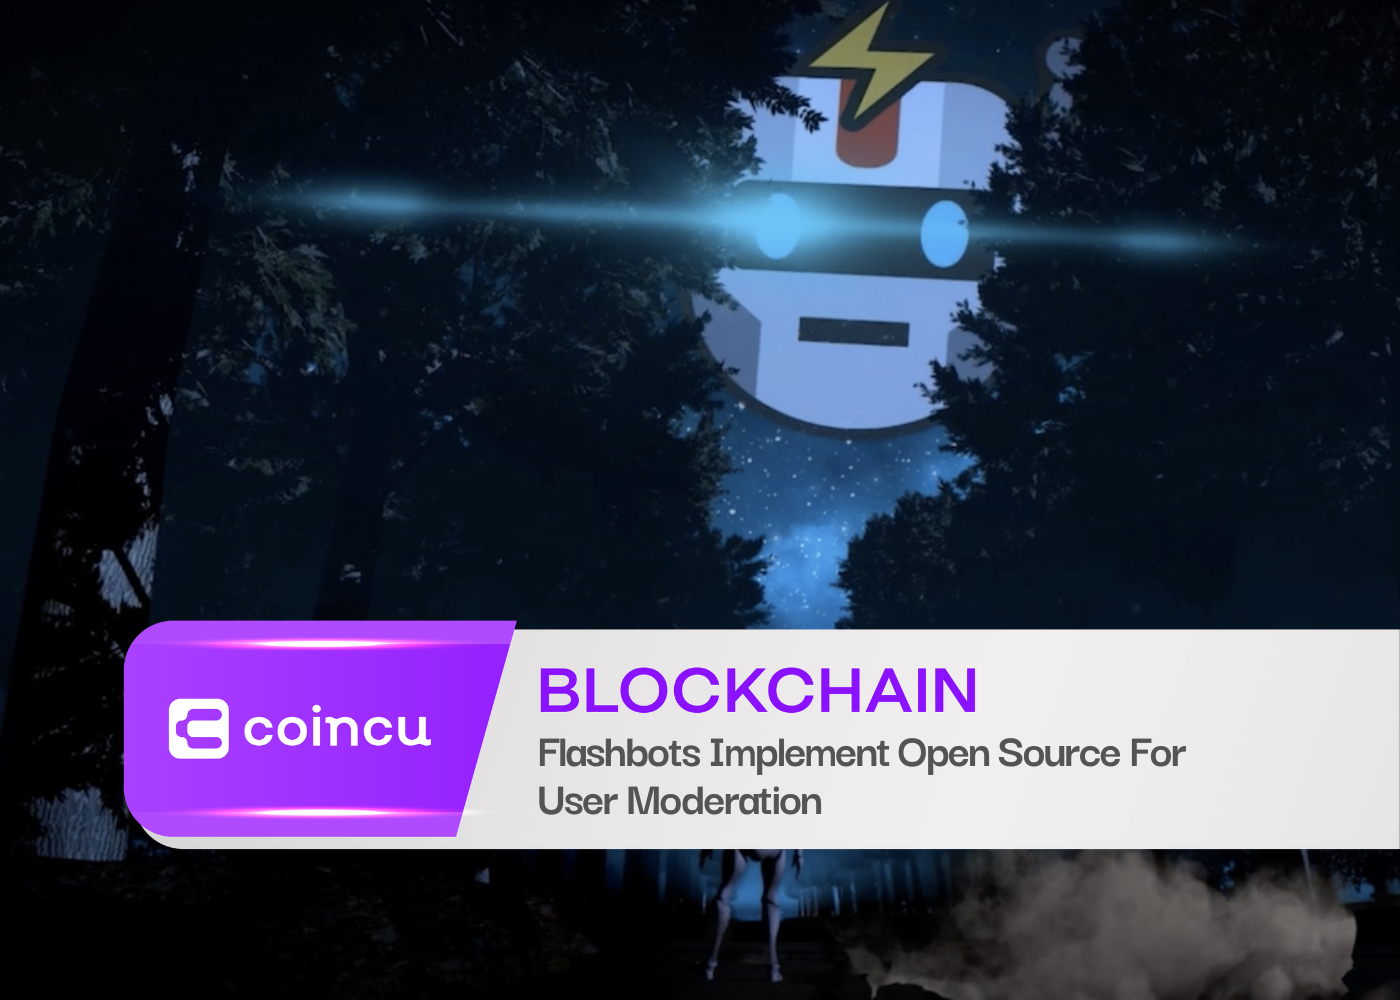 Flashbots Implement Open Source For User Moderation